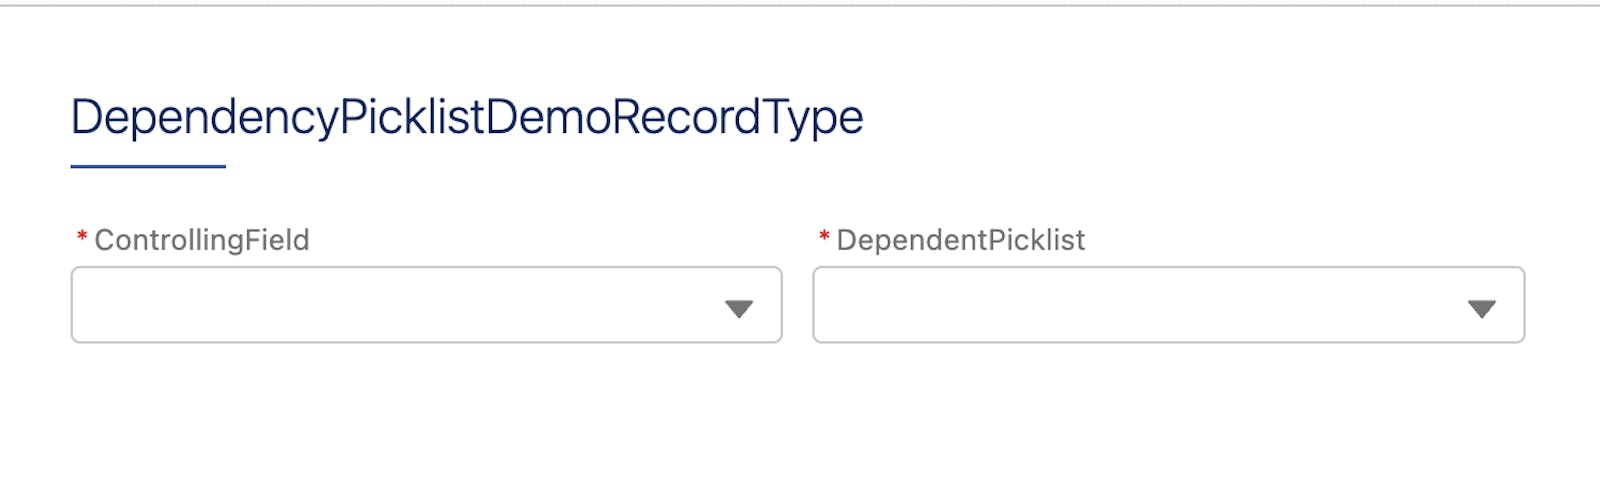 OmniStudio: How to Show RecordType and Controlling field-Based Values in OmniScript Select Element